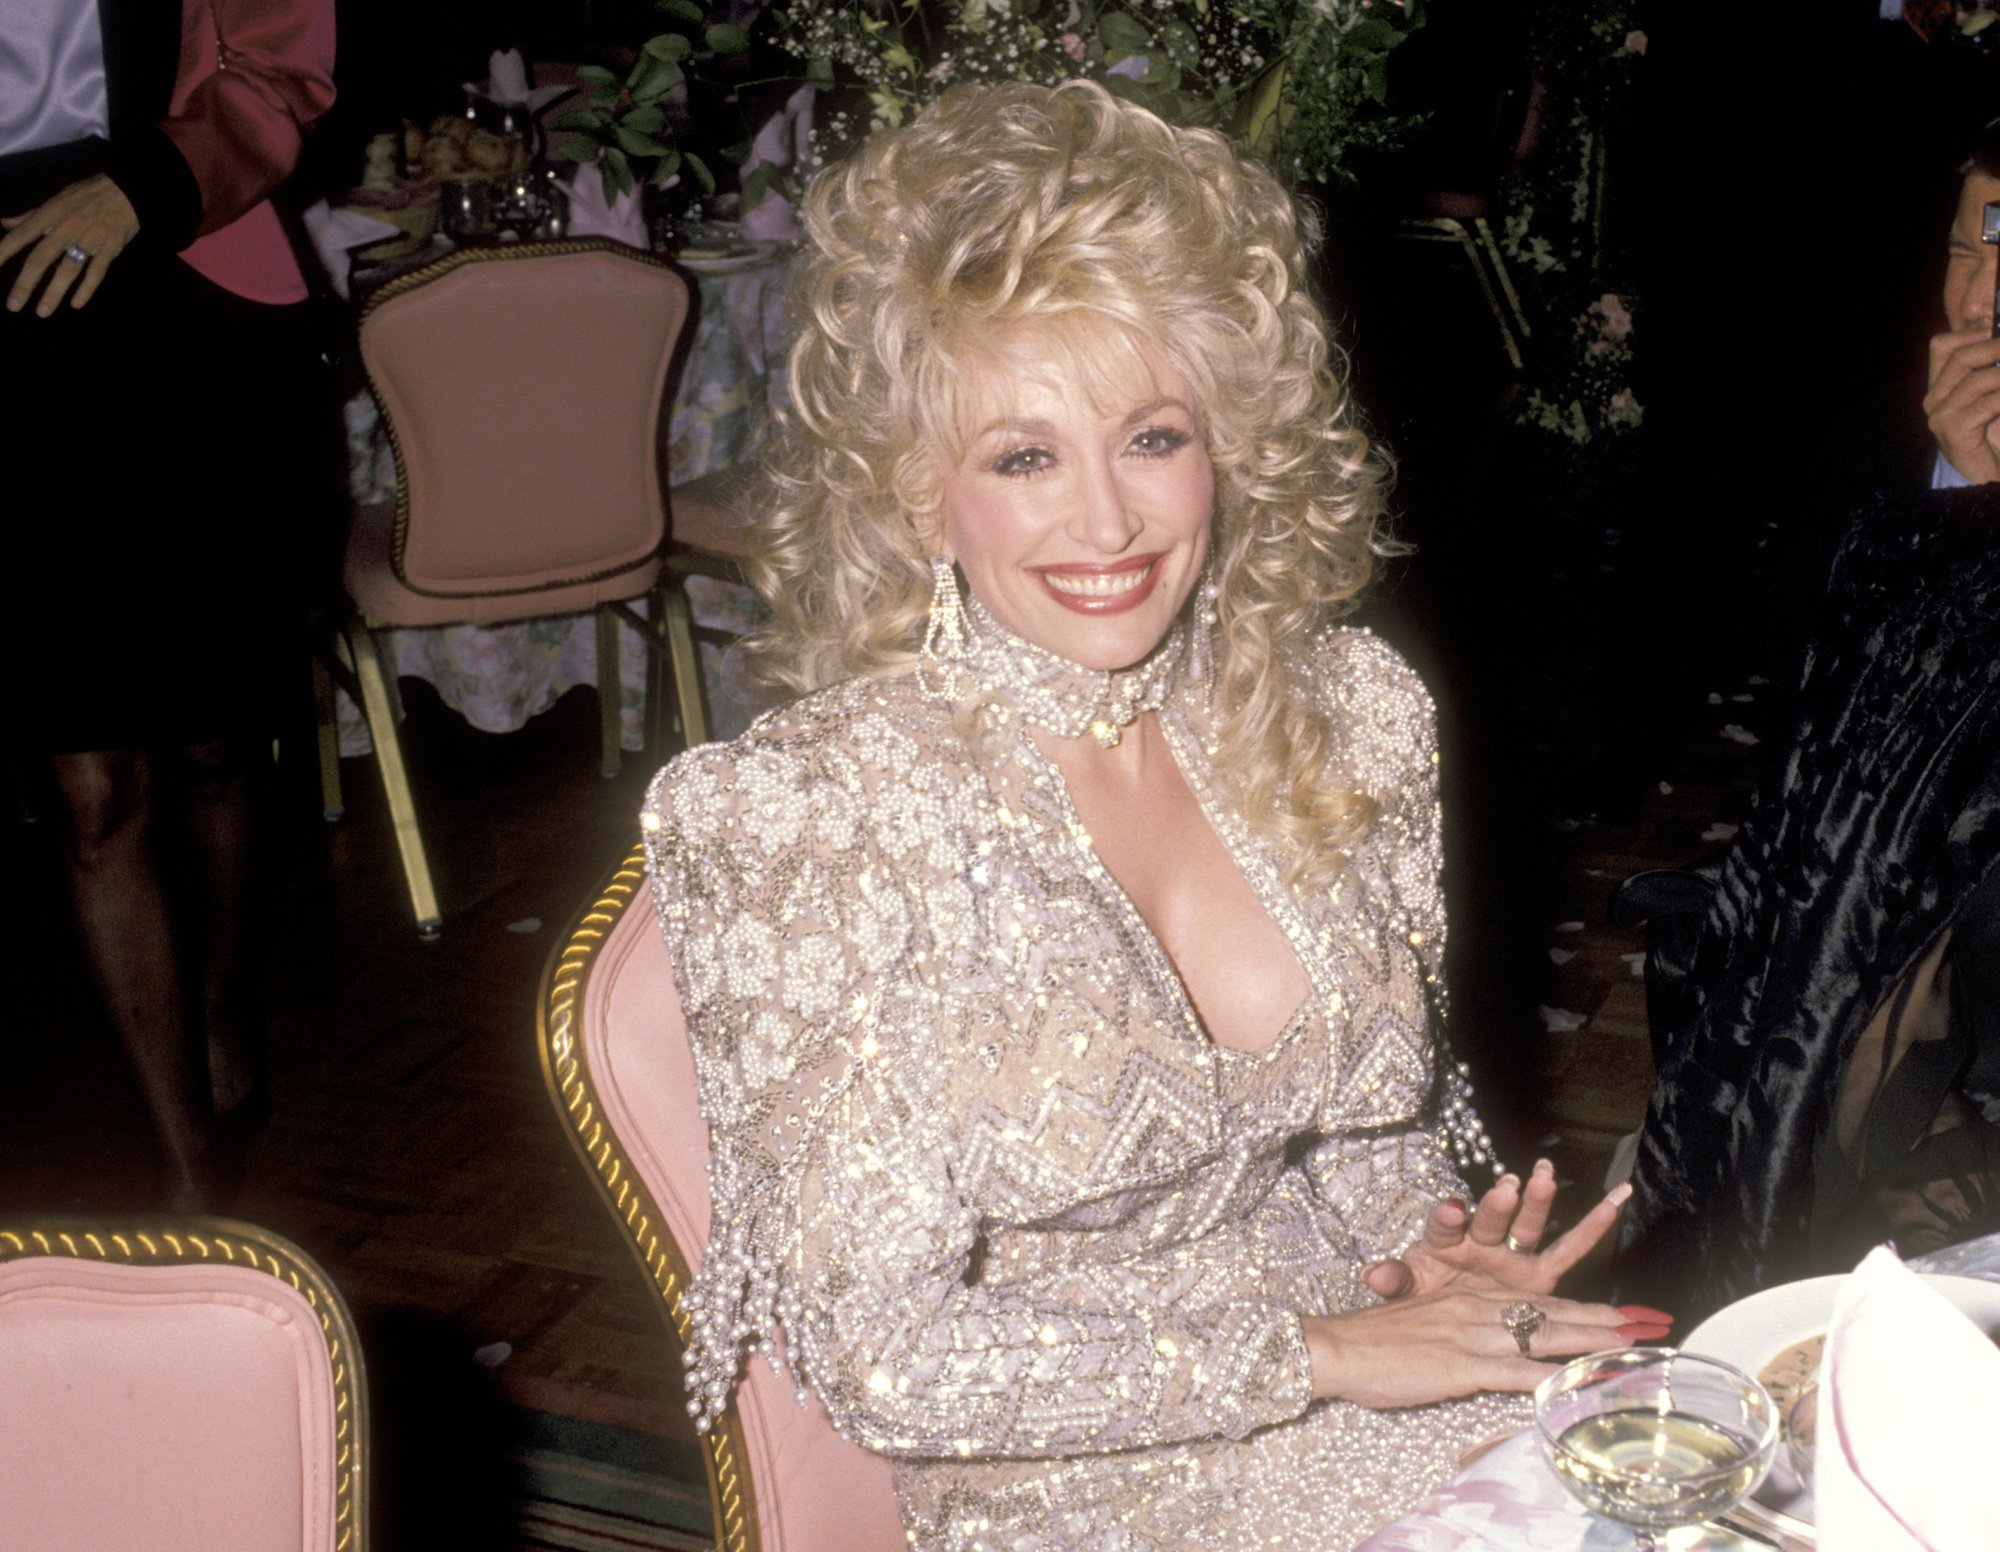 Dolly Parton Once Revealed She Paid 1 Million for Her Famous Breasts